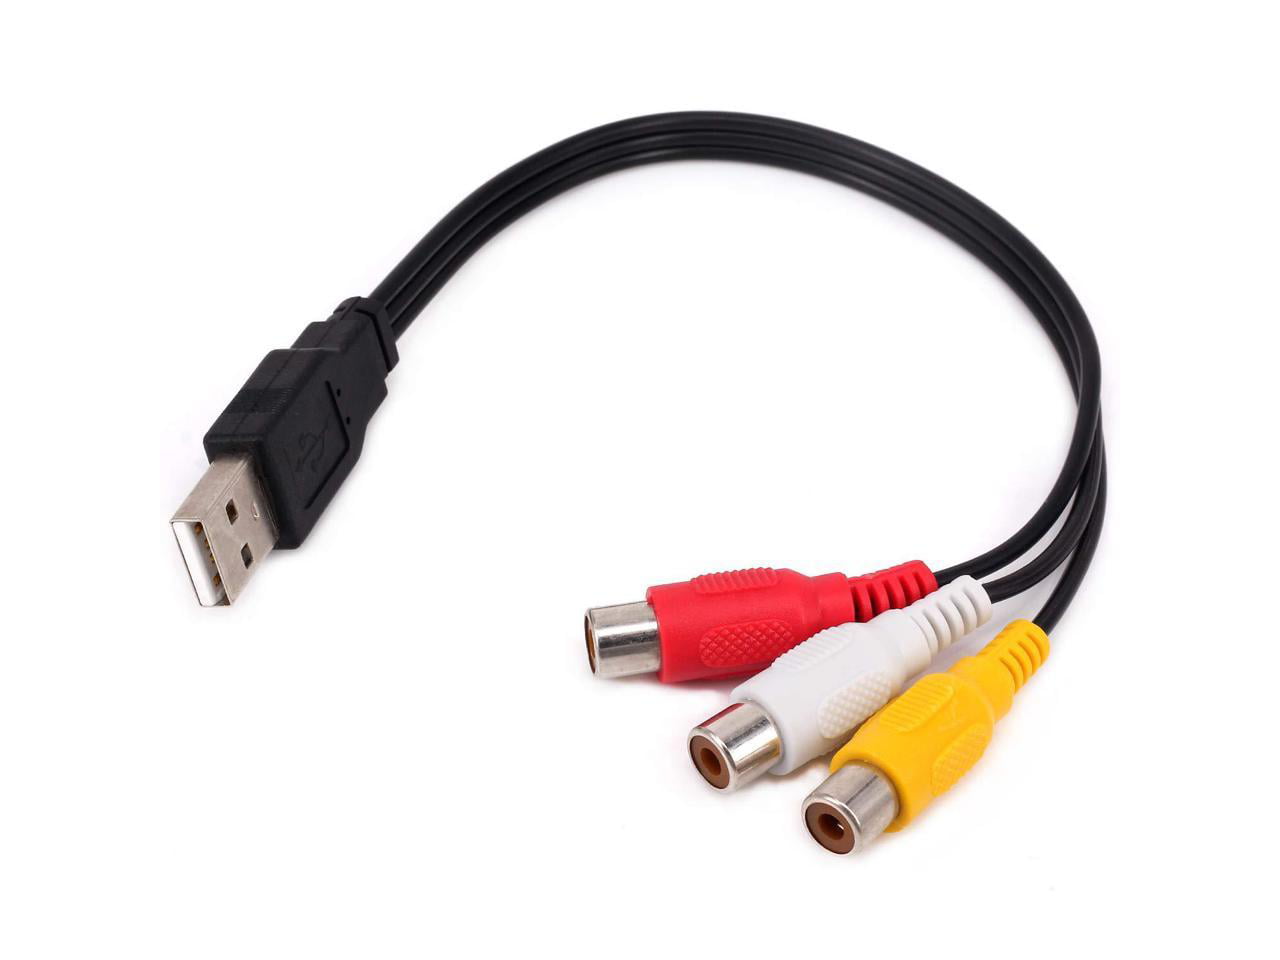  USB RCA Adapter Cable, 23 cm/9.06 Inches 8-pin Car Audio USB RCA  Adapter Cable Replacement Jack Splitter Car Audio Adapter Cable USB RCA  Plug Adapter Video Cable Converter Aux Audio Video